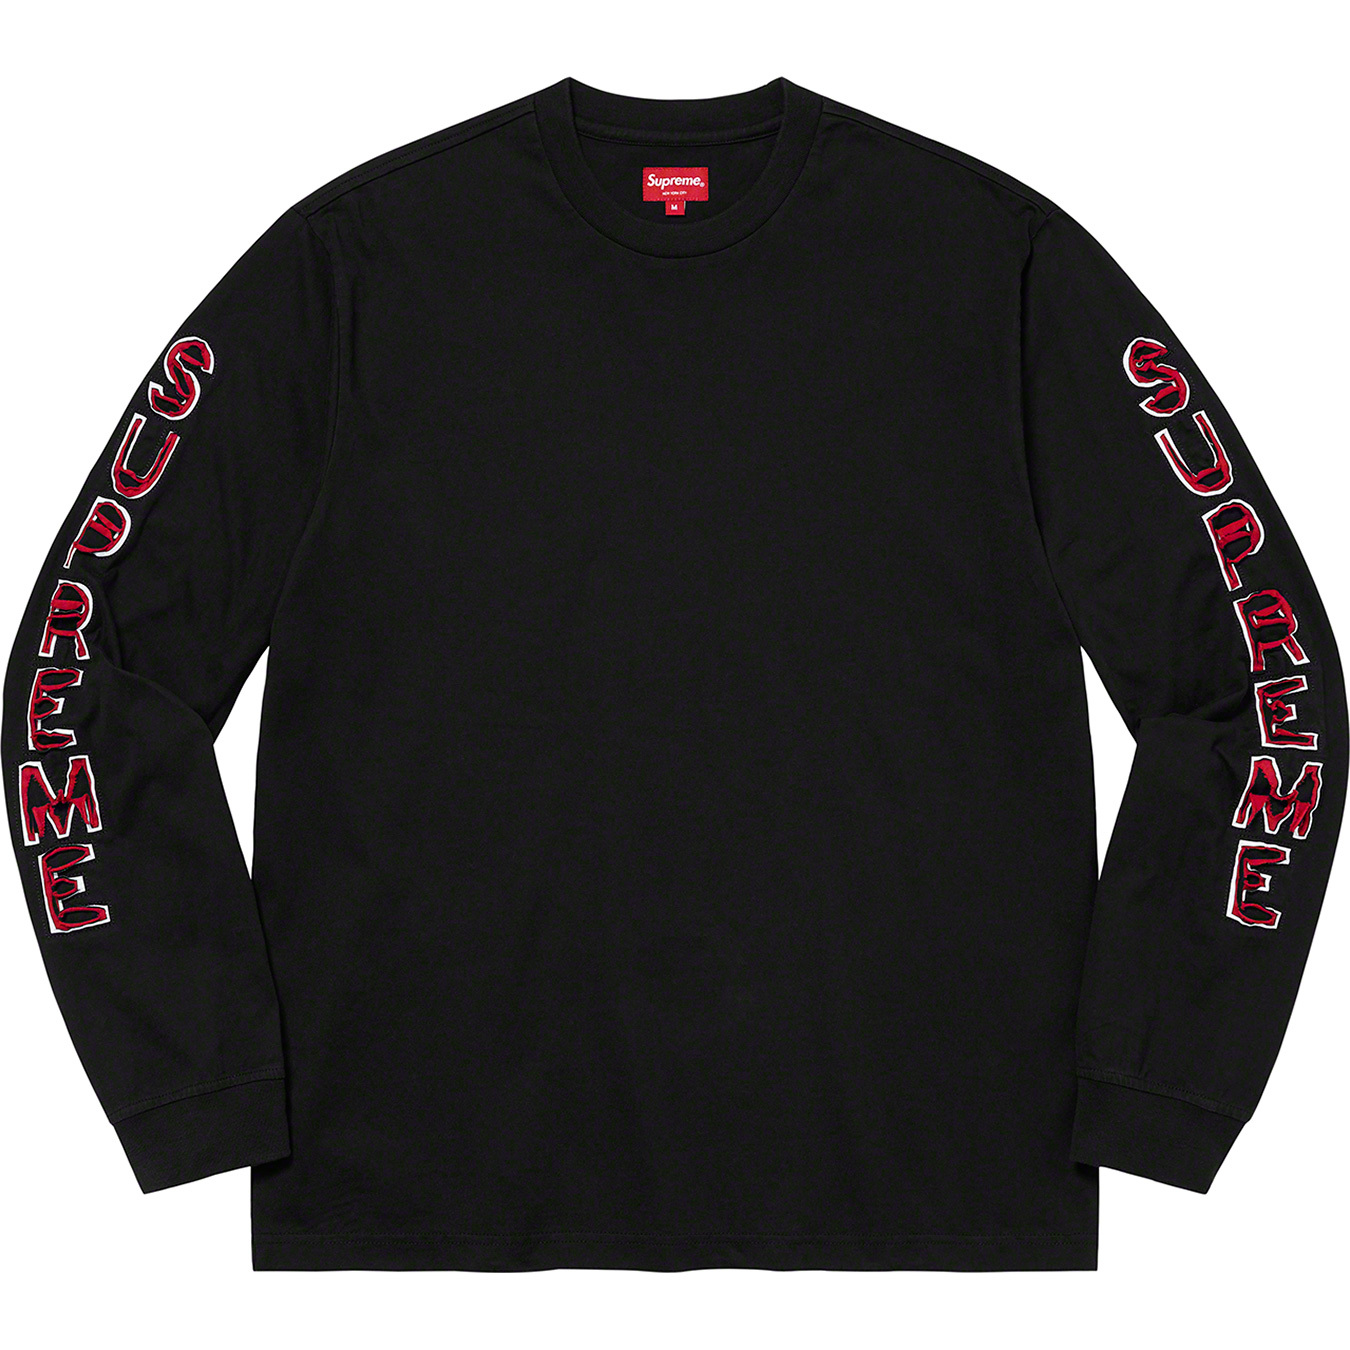 Cut Out L S Top - fall winter 2022 - Supreme